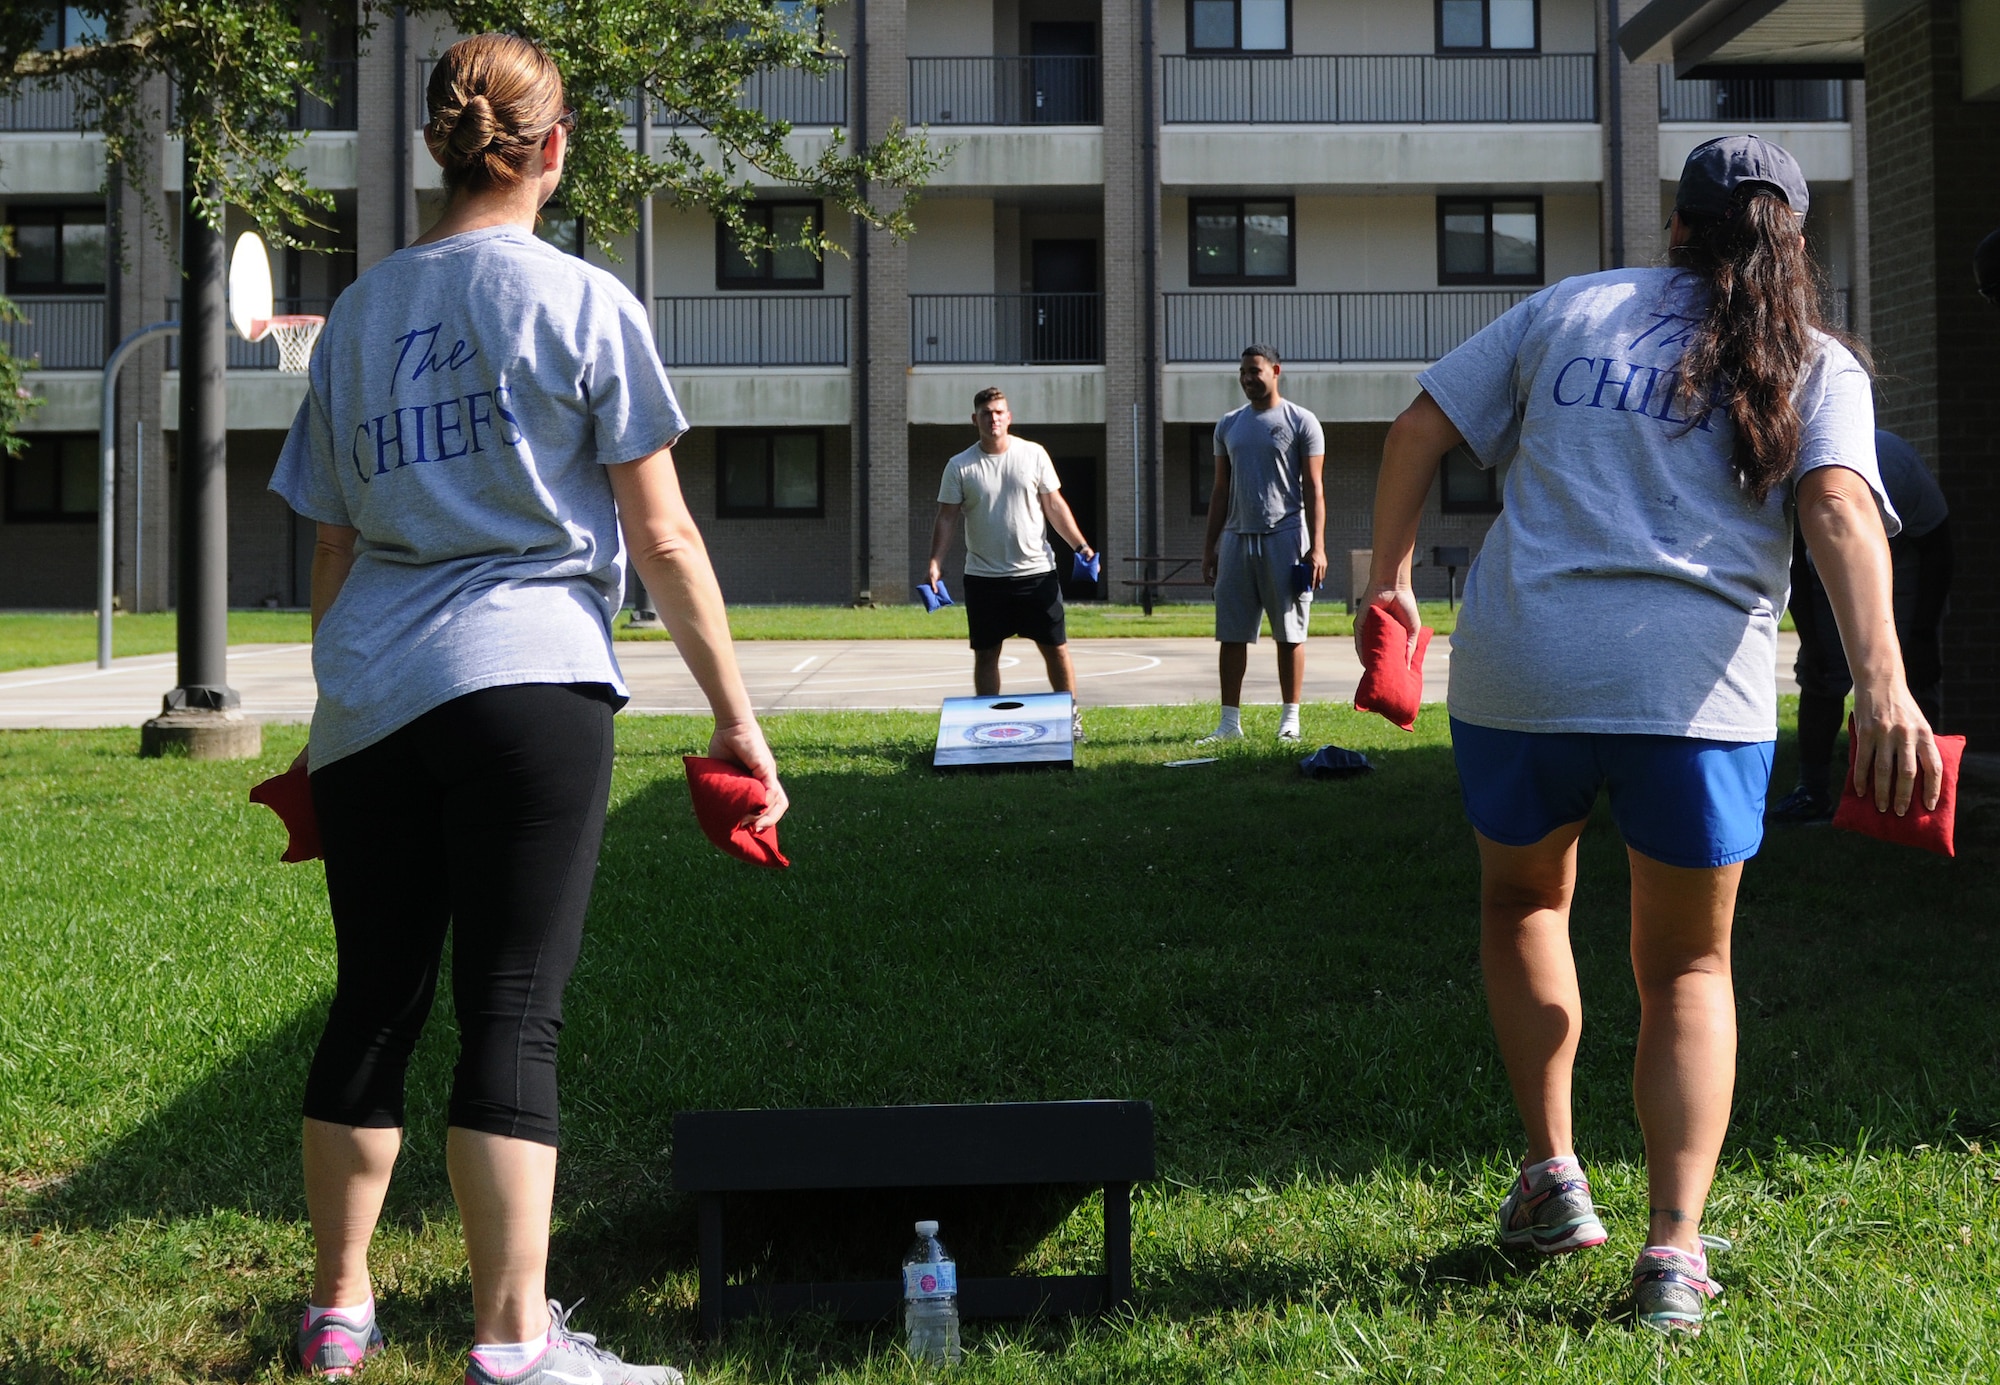 Keesler chief master sergeants and dorm residents play cornhole during the 2017 Dorm Bash at the Biloxi Hall courtyard August 1, 2017, on Keesler Air Force Base, Miss. The Dorm Bash was sponsored by the Keesler Chiefs Group to provide an opportunity for Keesler dorm residents to spend time together in fellowship. The chief master sergeants took home the Battle of the Bash Dragon award. (U.S. Air Force photo by Airman 1st Class Suzanna Plotnikov)